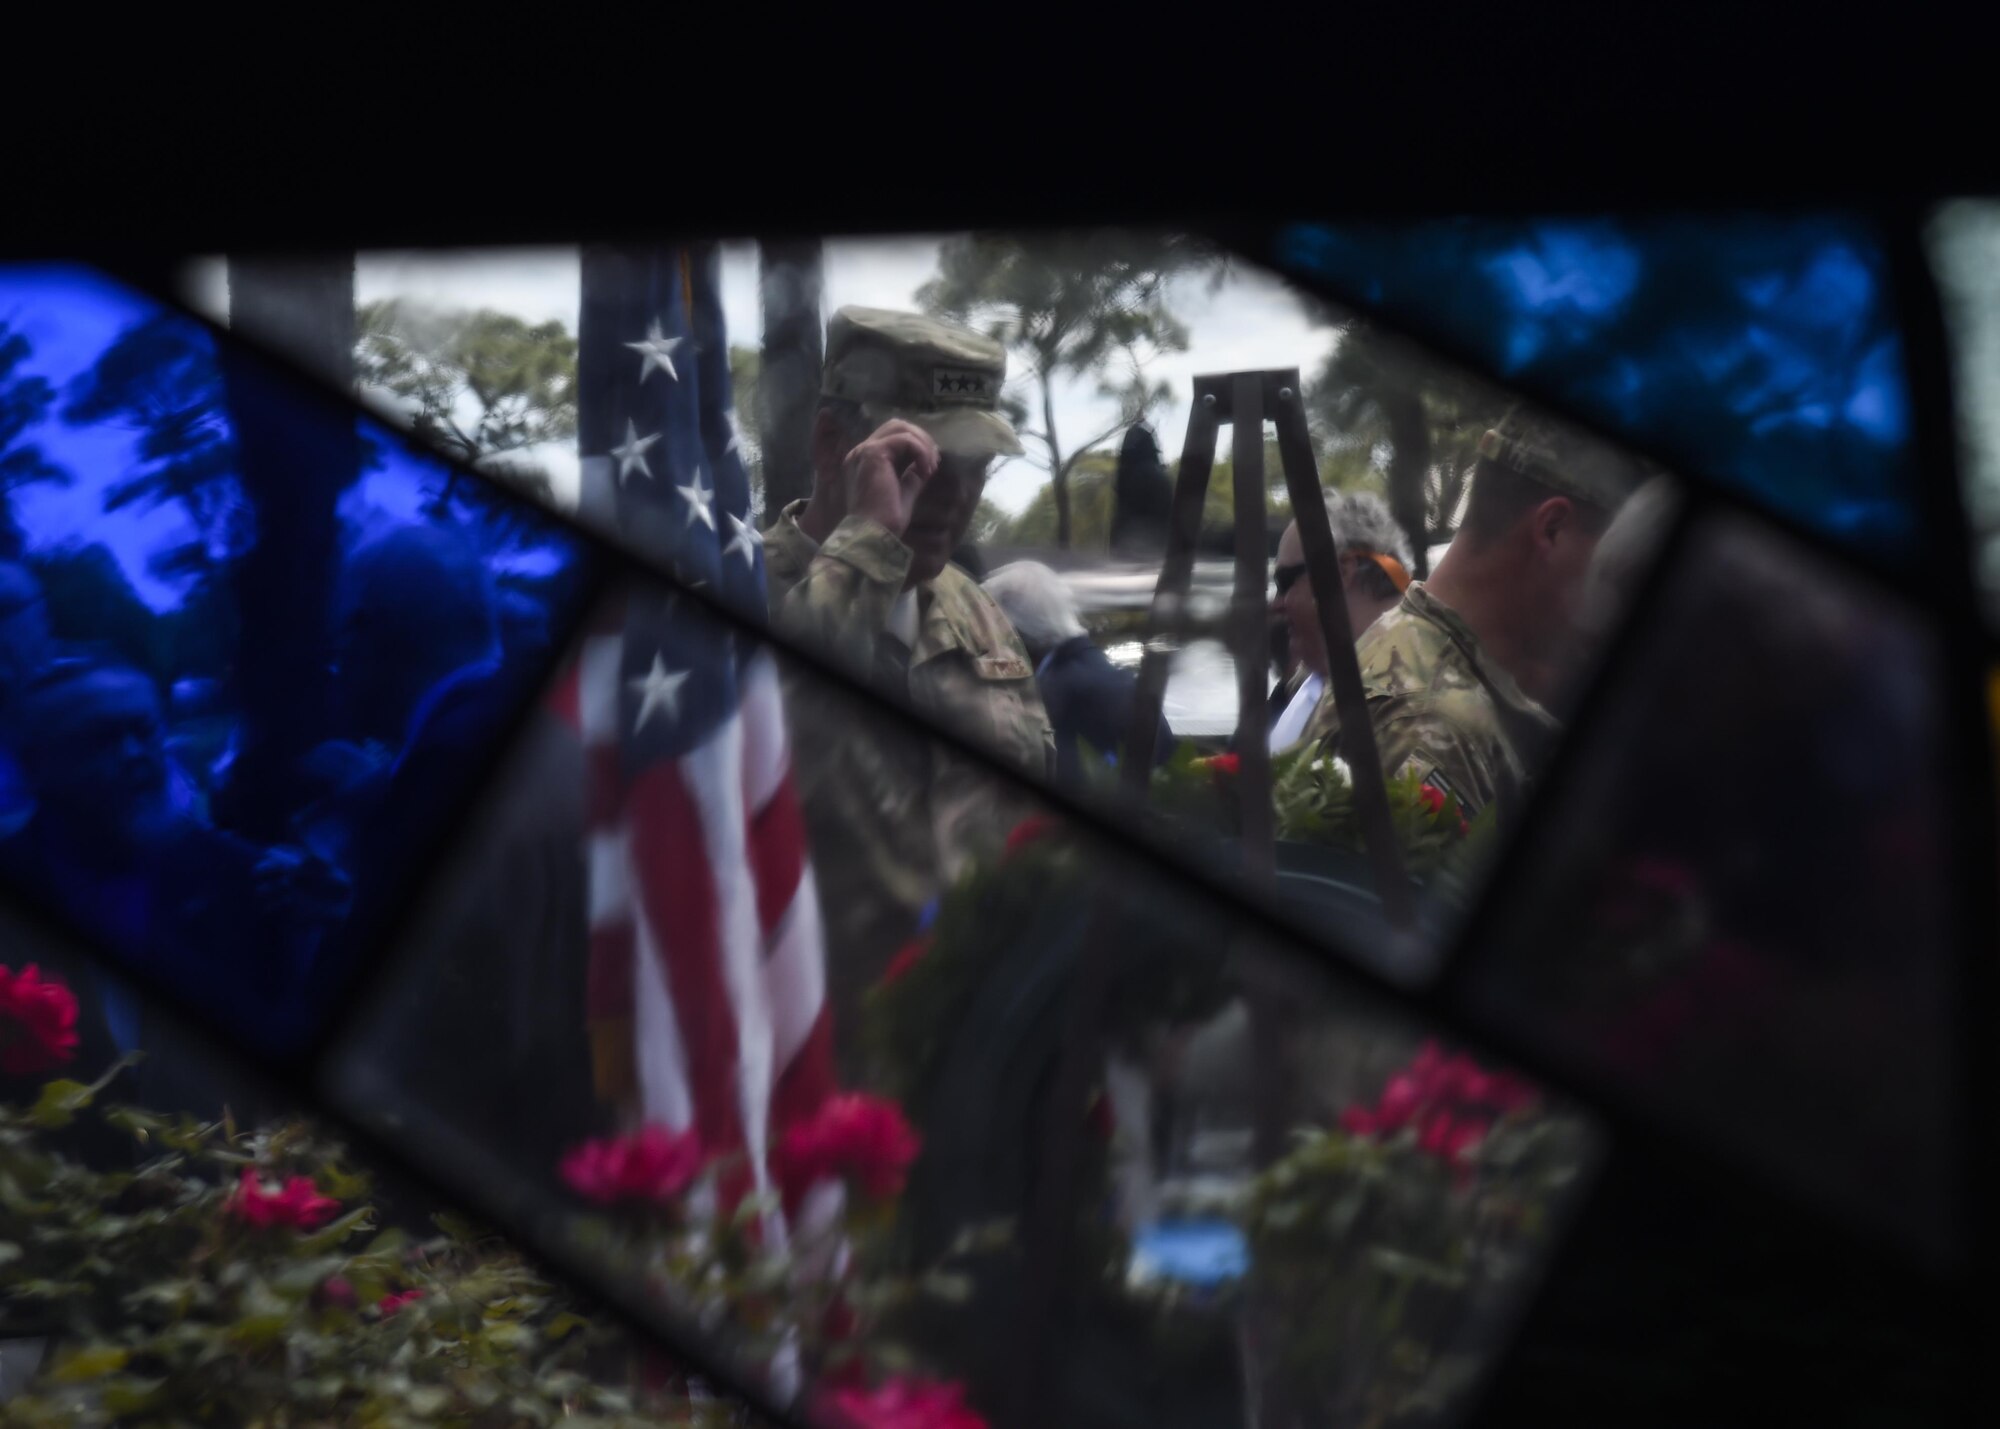 Lt. Gen. Bradley Heithold, the commander of Air Force Special Operations Command, pays his respects during a ceremony for the 36th anniversary of Operation Eagle Claw at Hurlburt Field, Fla., April 25, 2016. Operation Eagle Claw, the attempted rescue mission of American hostages from the United States embassy in Iran, ended in disaster at the Desert One refueling site in April 1980. Eight American service members were killed during the mission, resulting in the Holloway Commission to convene and analyze why the mission failed. The recommended corrective actions led to the gradual reorganization and rebirth of United States Special Operations Command in 1987. (U.S. Air Force photo Airman 1st Class Kai White)